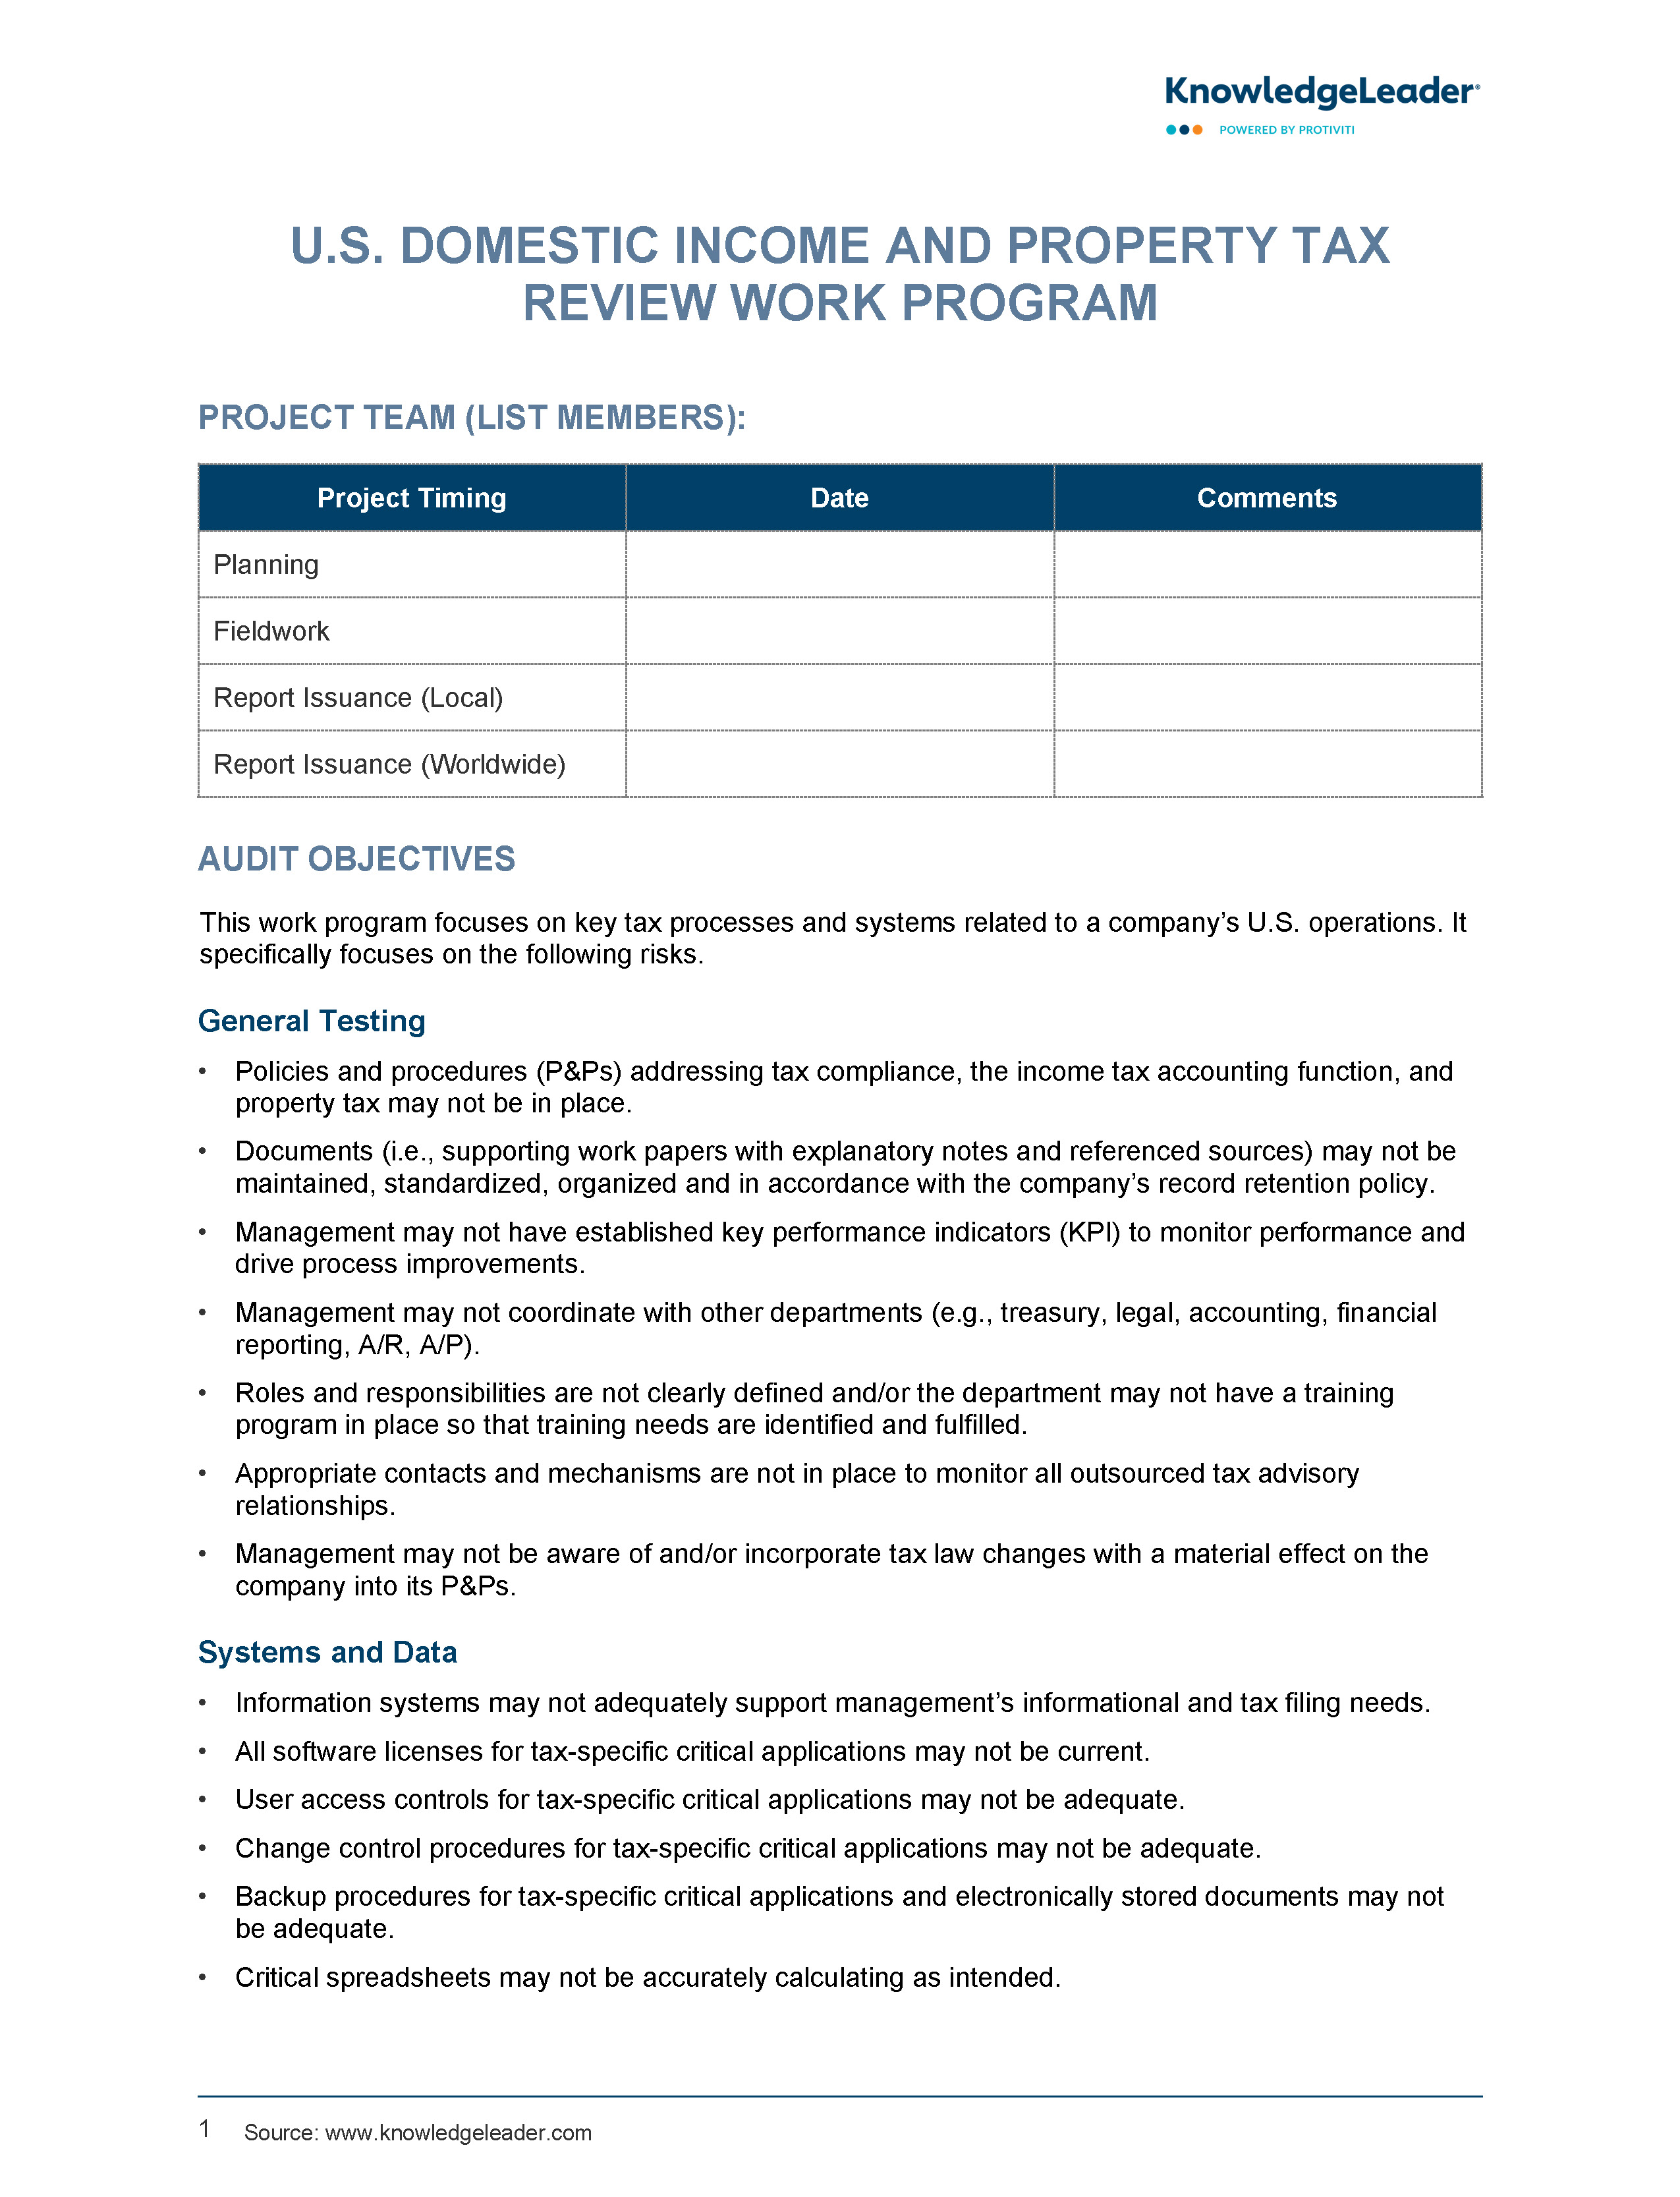 Screenshot of the first page of U.S. Domestic Income and Property Tax Review Audit Work Program